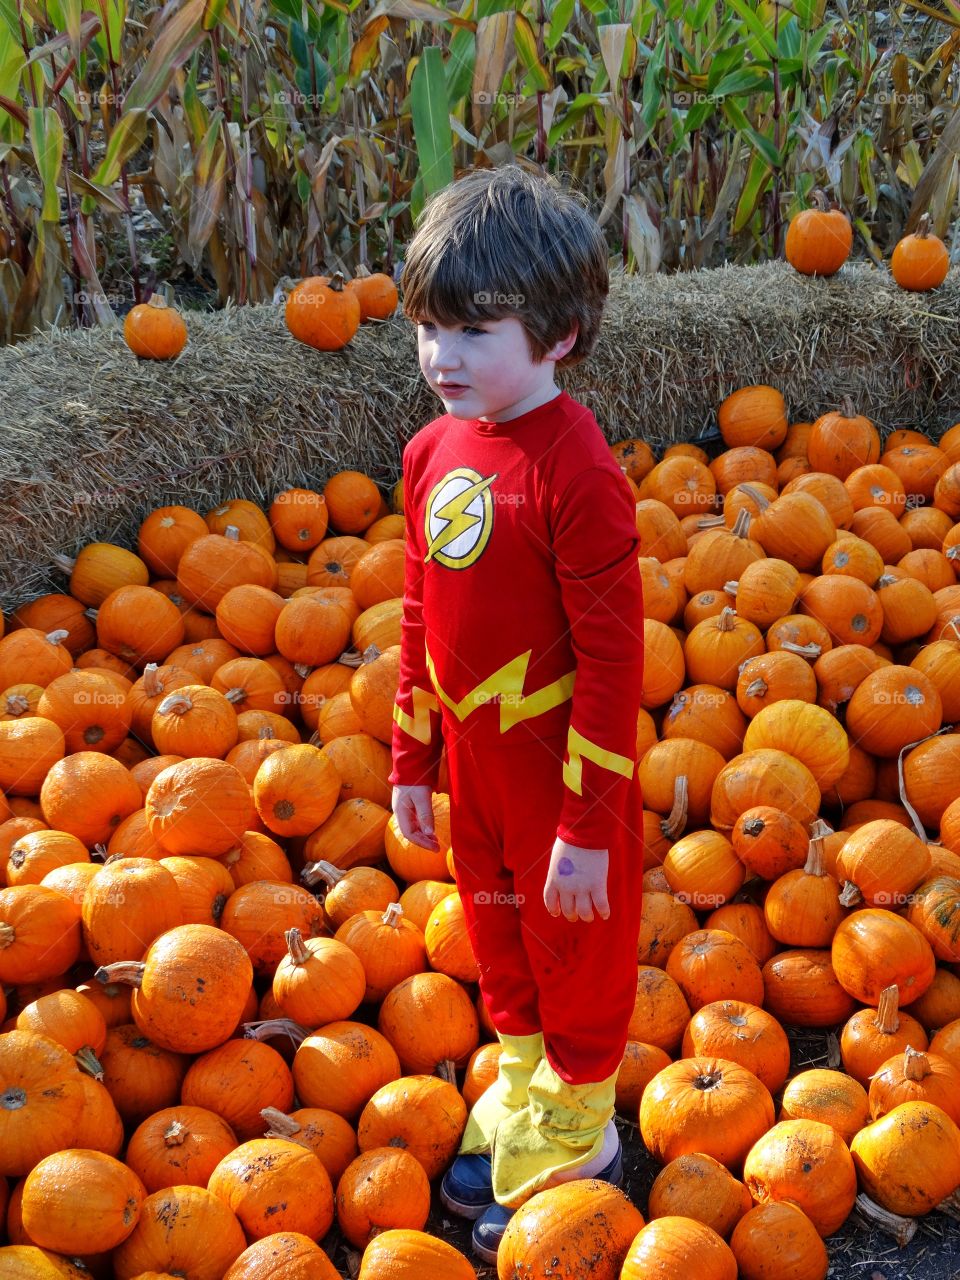 Young Boy Visiting The Pumpkin Patch
